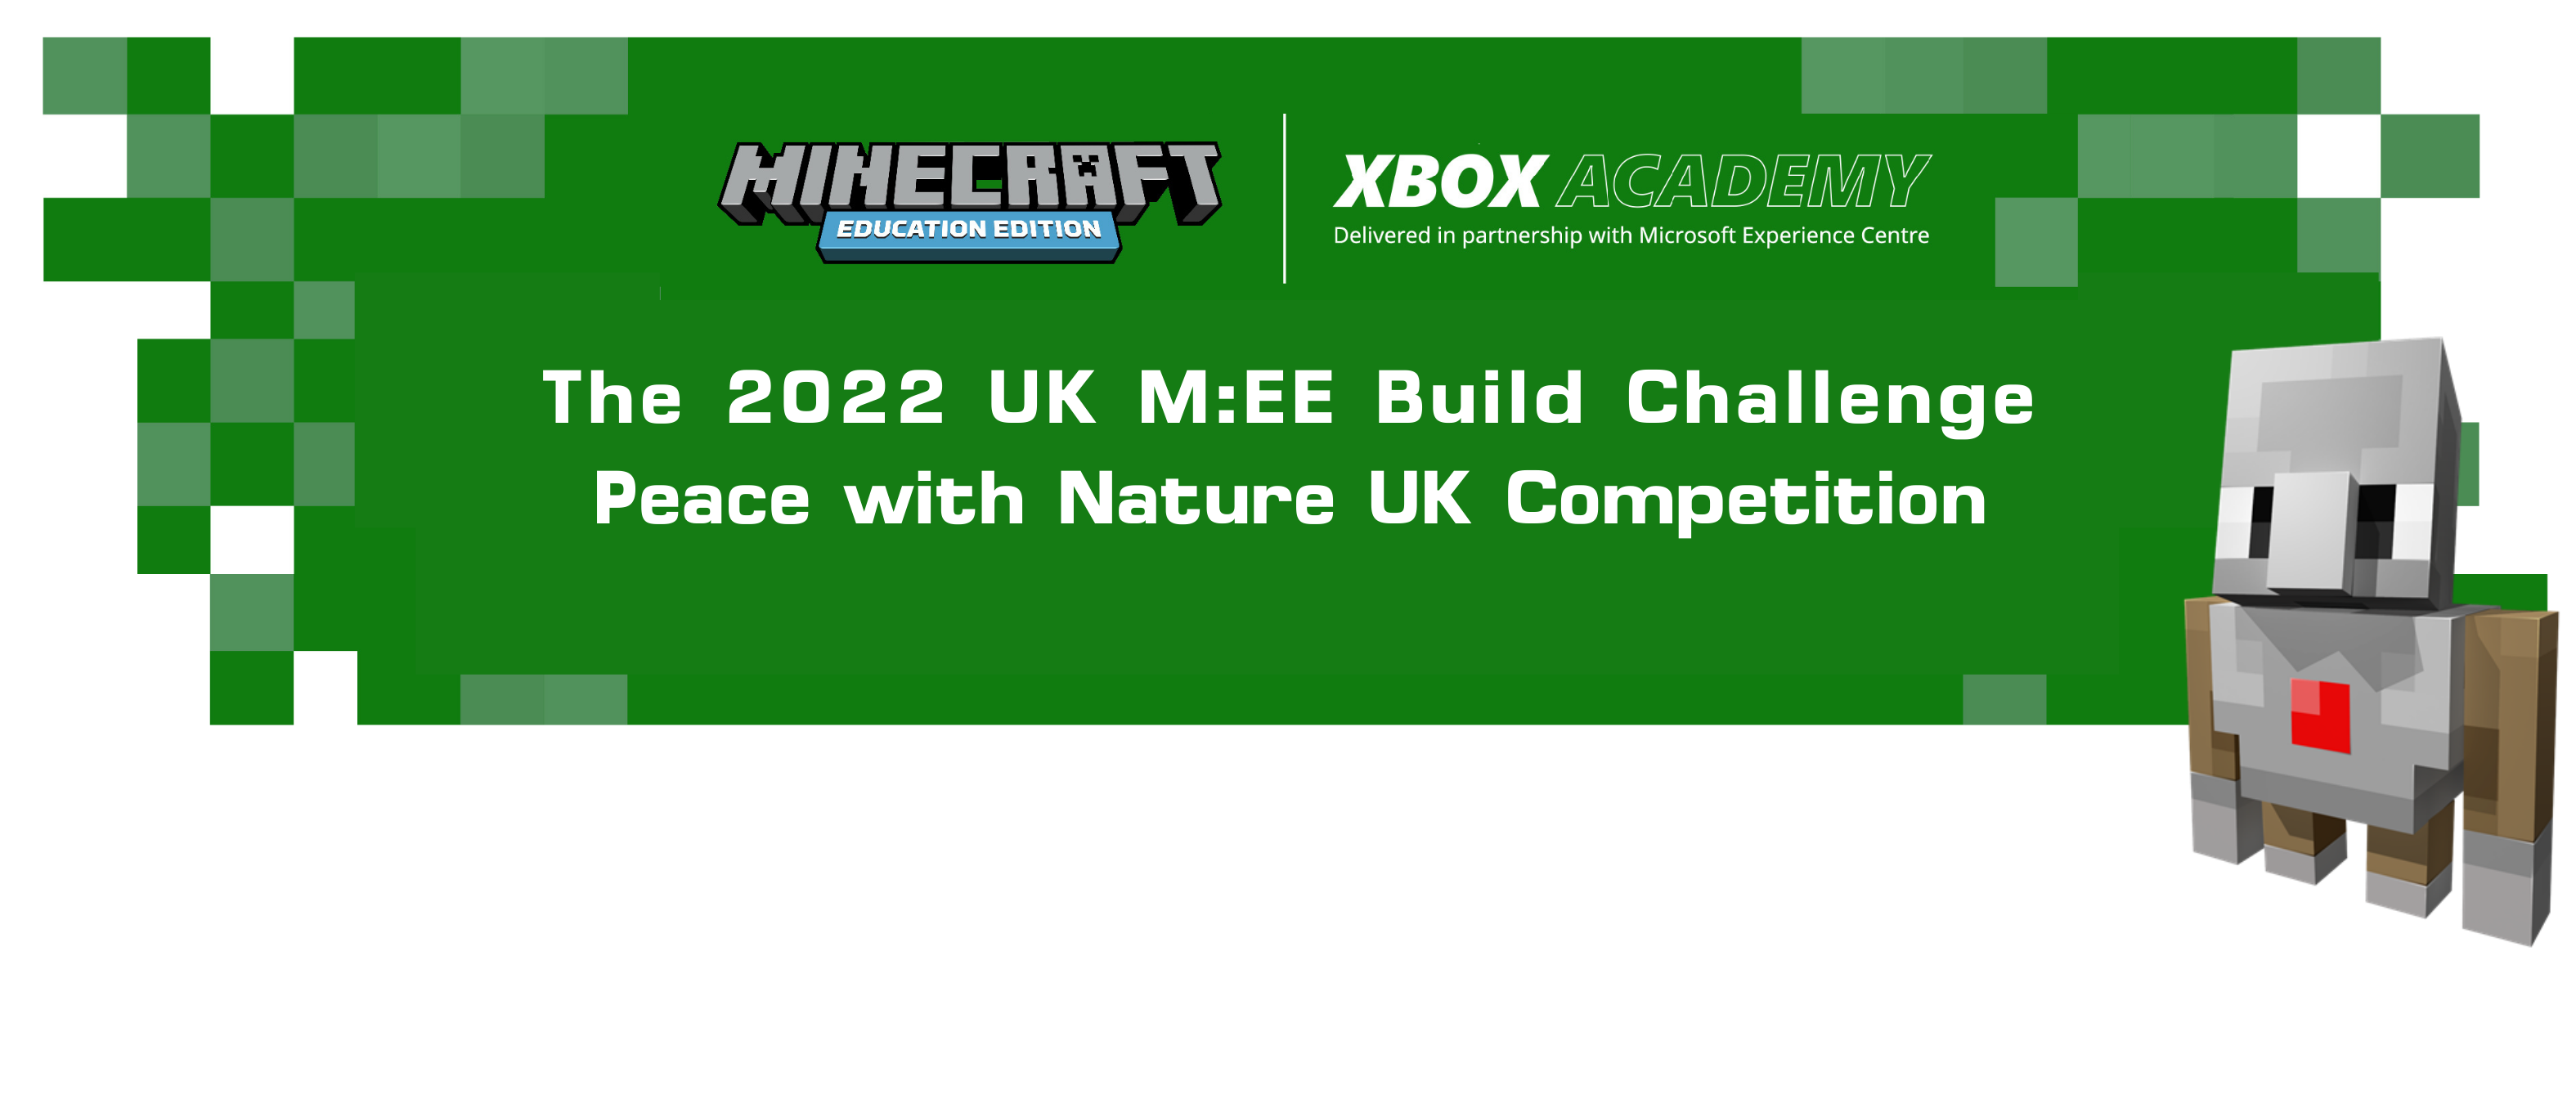 Featured image for “The 2022 UK M:EE Build Challenge”